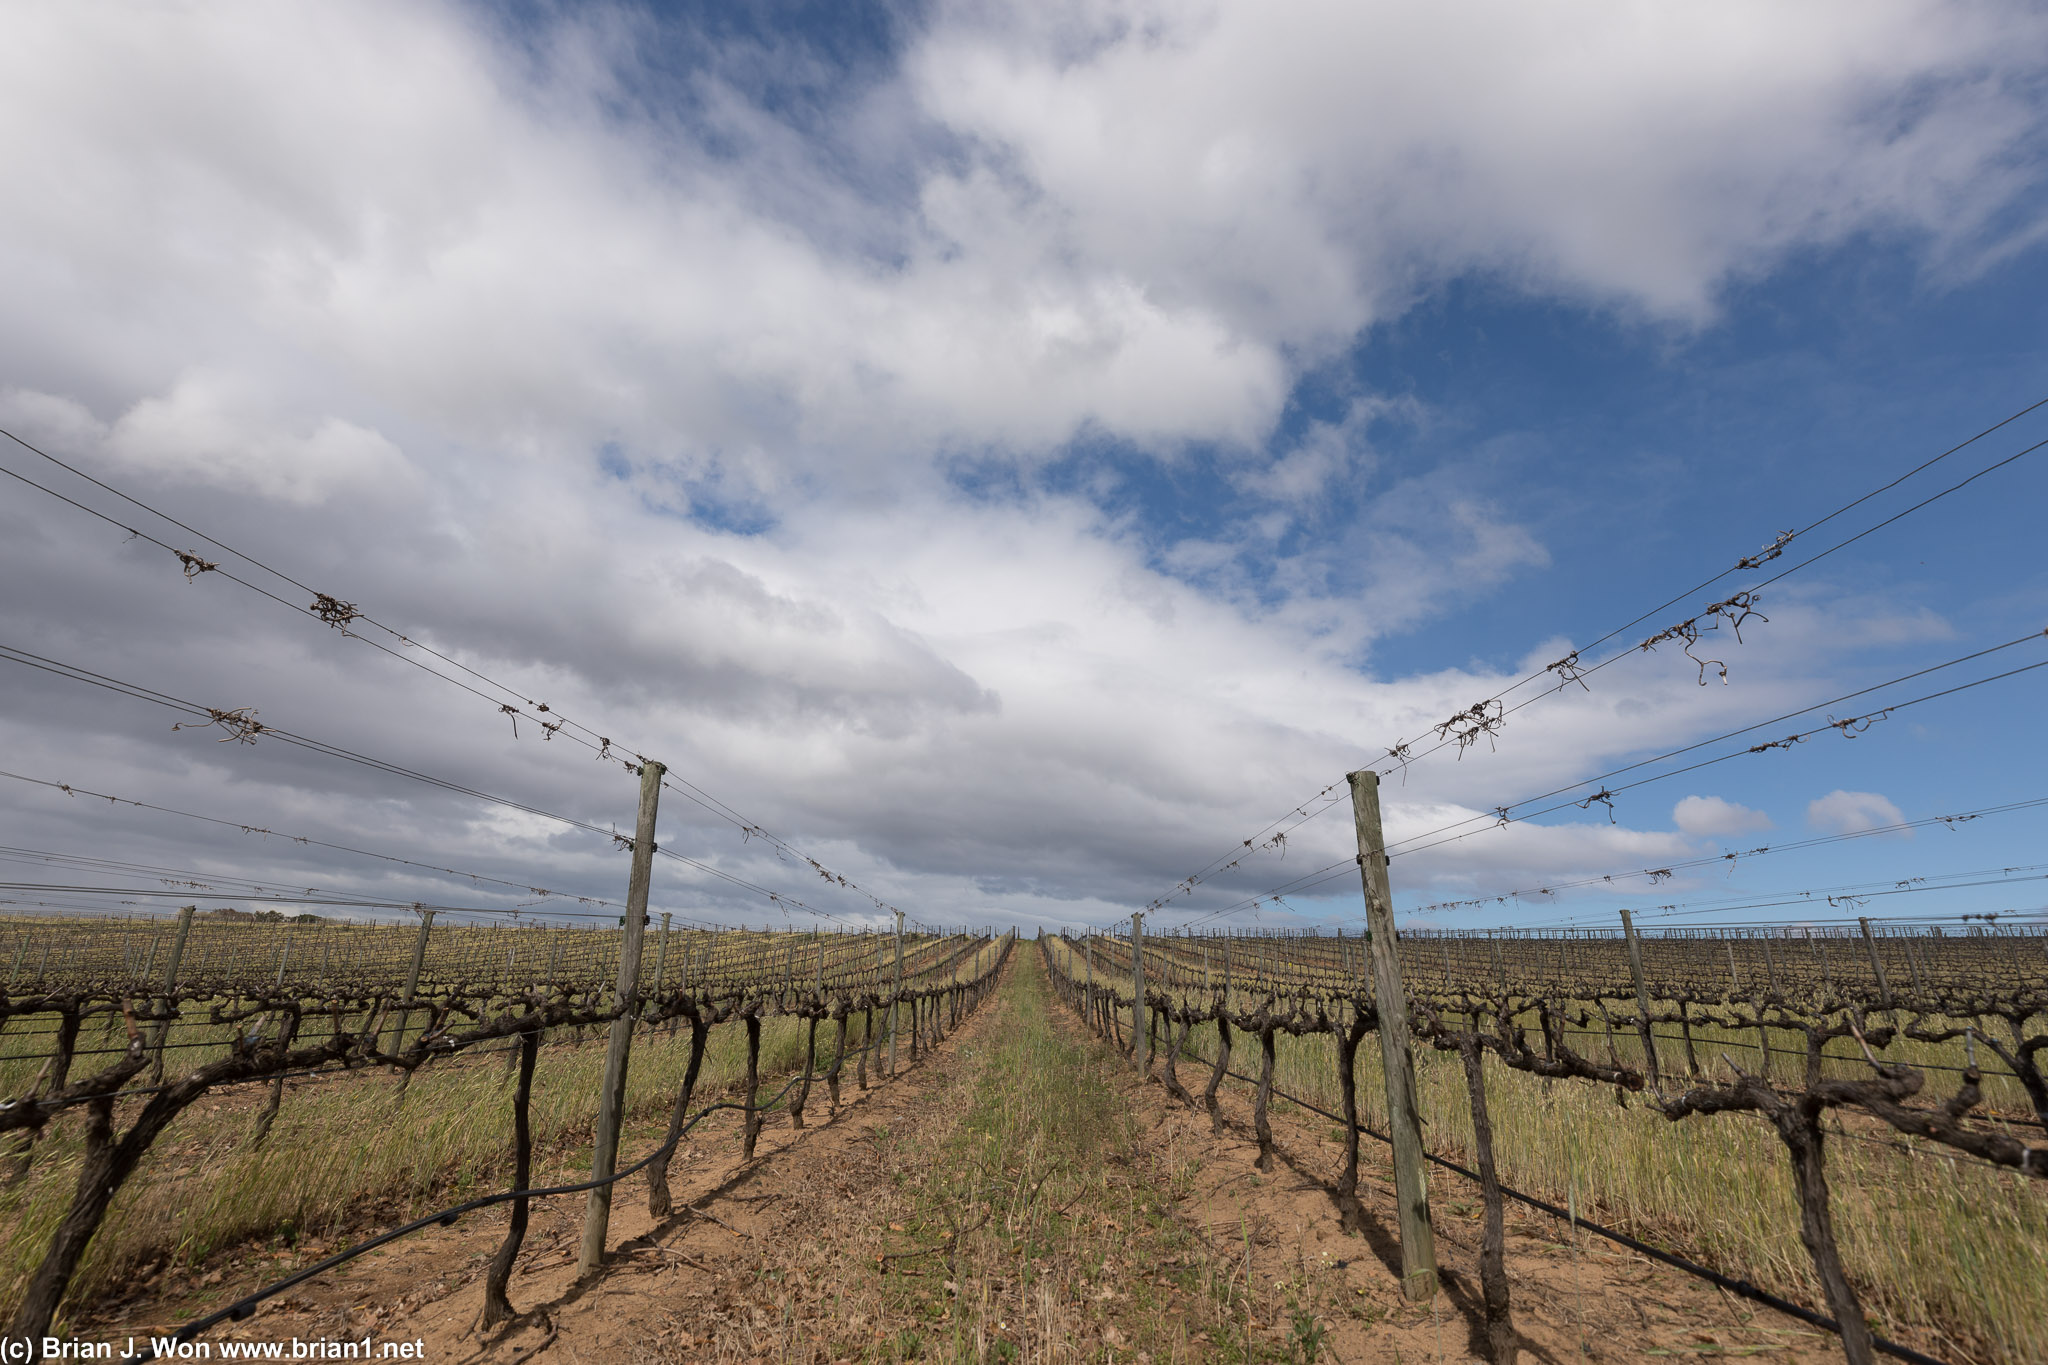 The clouds break over the grape vines.